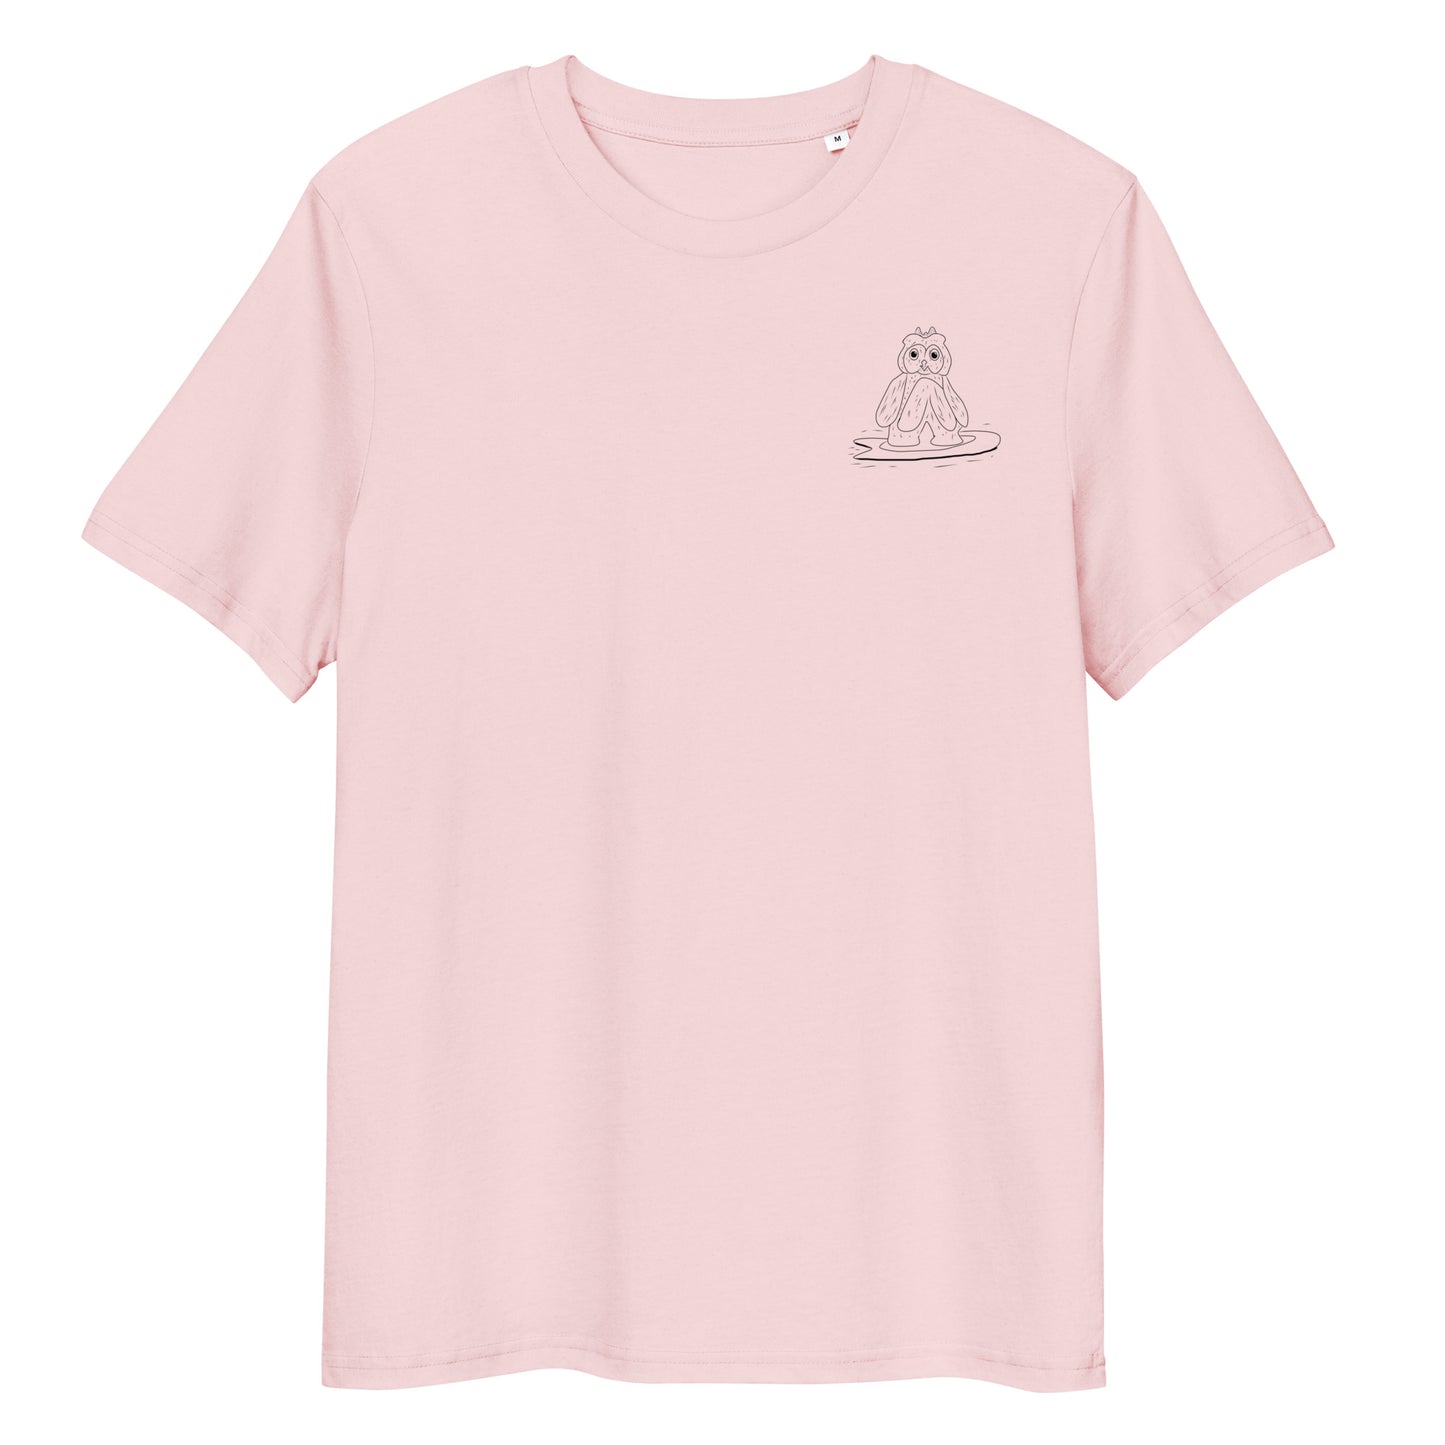 Surfing Owl | 100% Organic Cotton T Shirt in pink